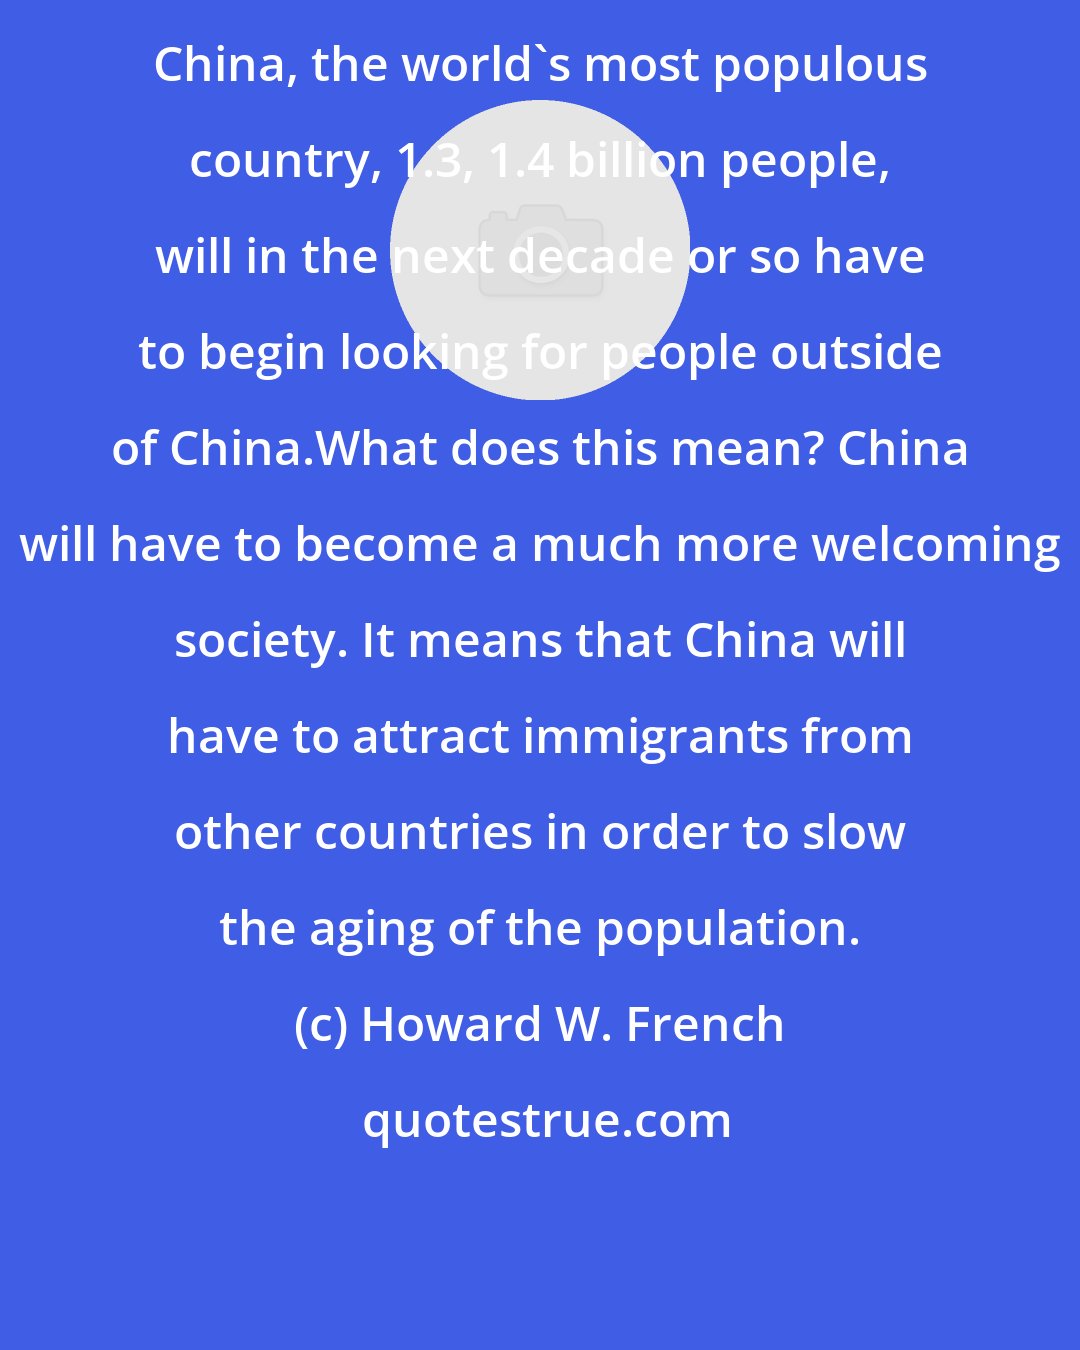 Howard W. French: China, the world's most populous country, 1.3, 1.4 billion people, will in the next decade or so have to begin looking for people outside of China.What does this mean? China will have to become a much more welcoming society. It means that China will have to attract immigrants from other countries in order to slow the aging of the population.